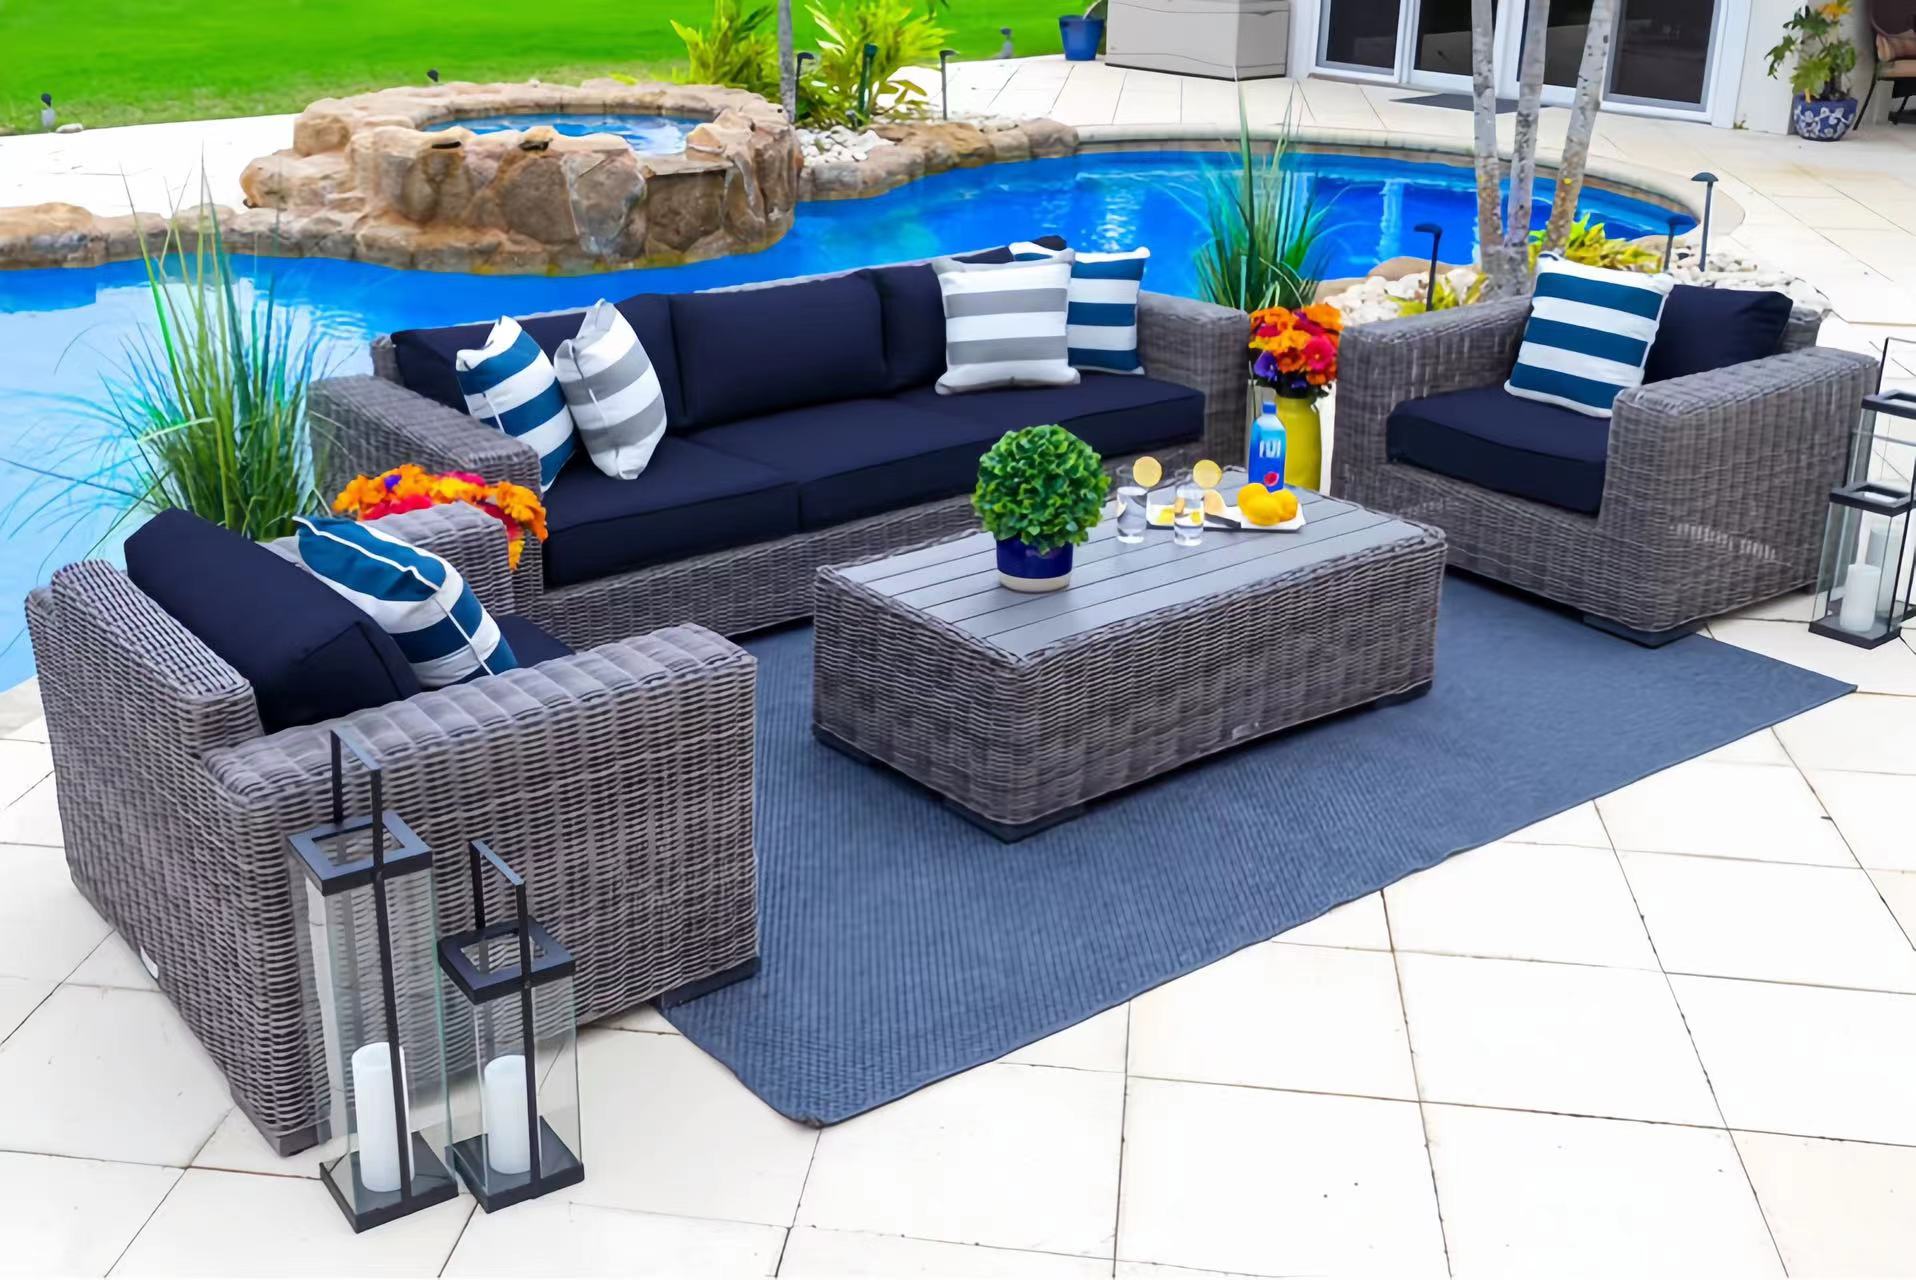 Relax with style in your outdoor space with the Malmo Collection. Complete with a three-seat sofa, two armchairs, and a coffee table, this set comes with everything you need to enjoy quality time with your guests and family on your patio.